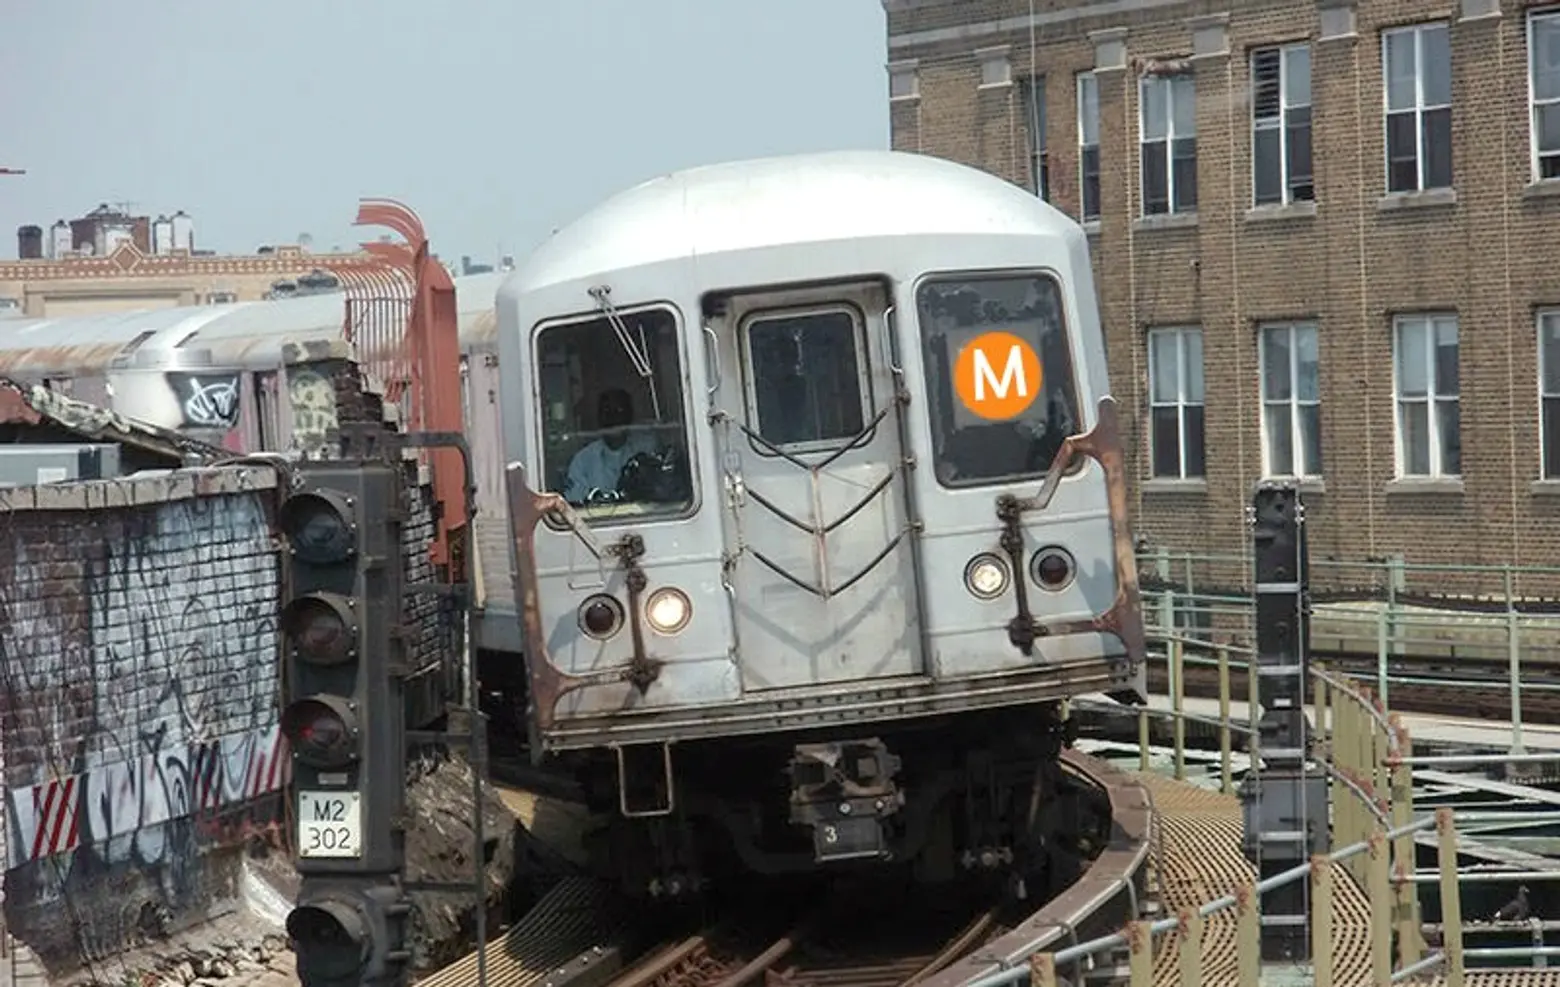 Entire 2 and M train lines to run with 12- and 20-minute planned delays